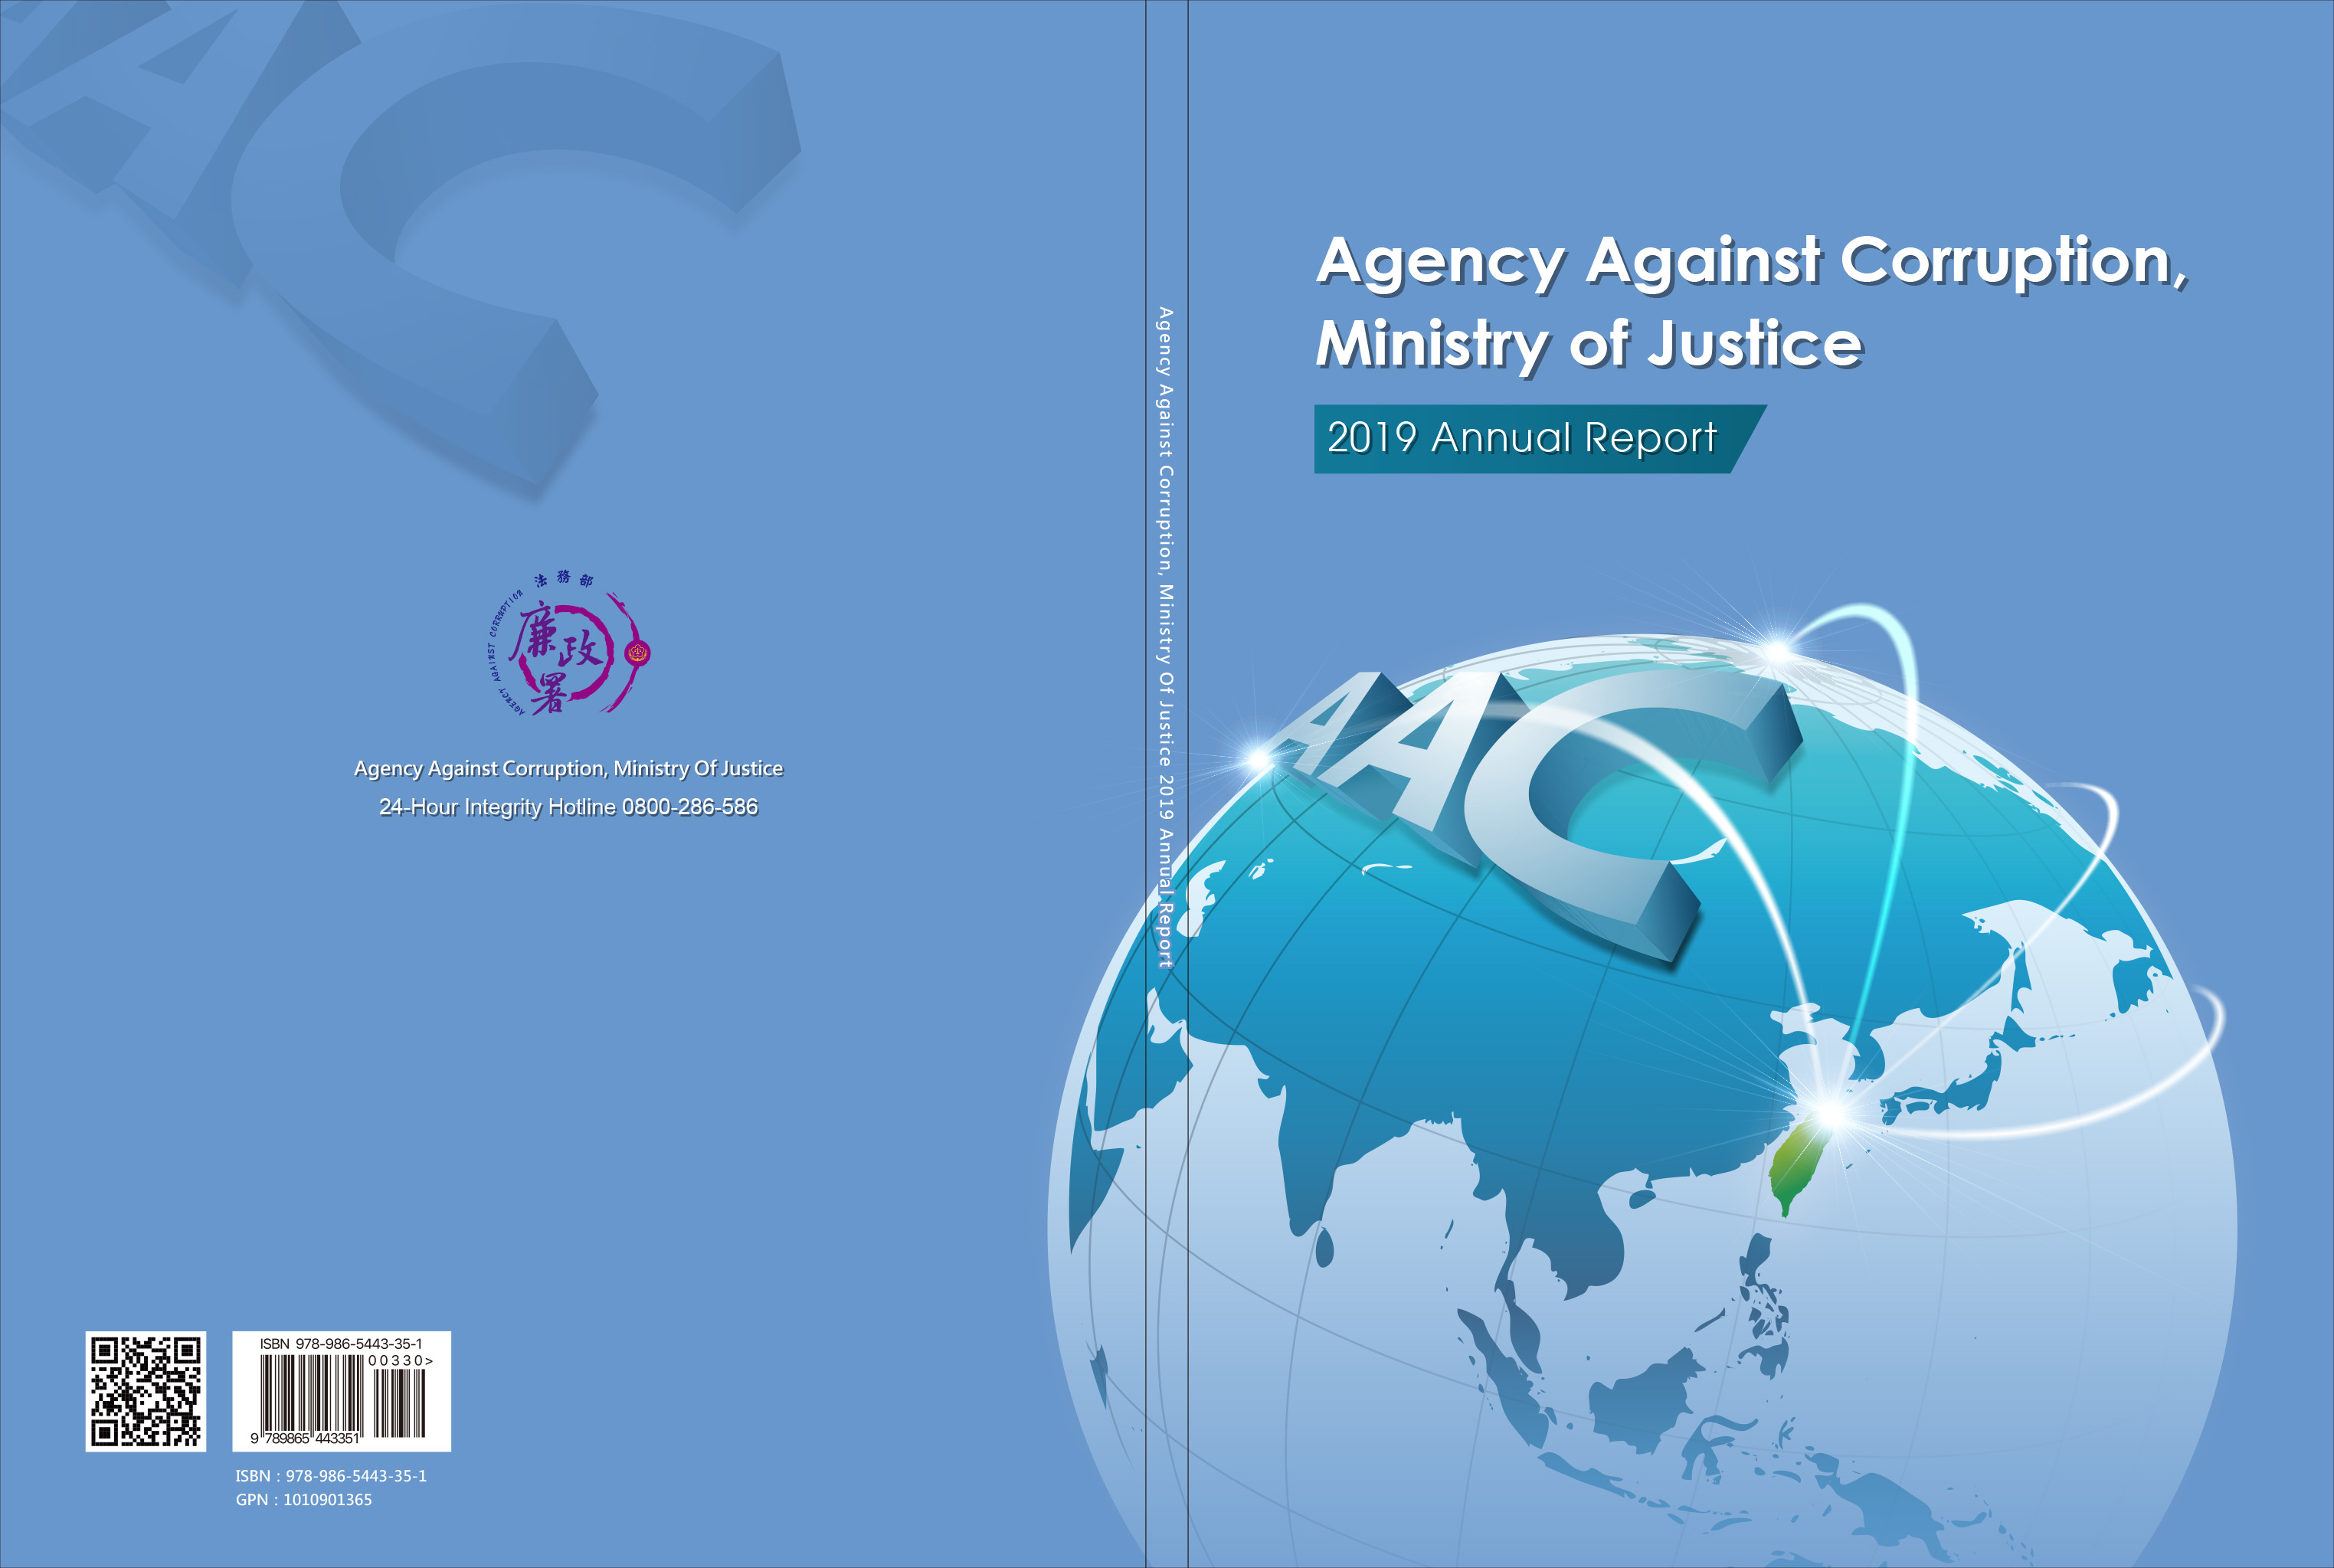 Agency Against Corruption, Ministry of Justice 2019 Annual Report